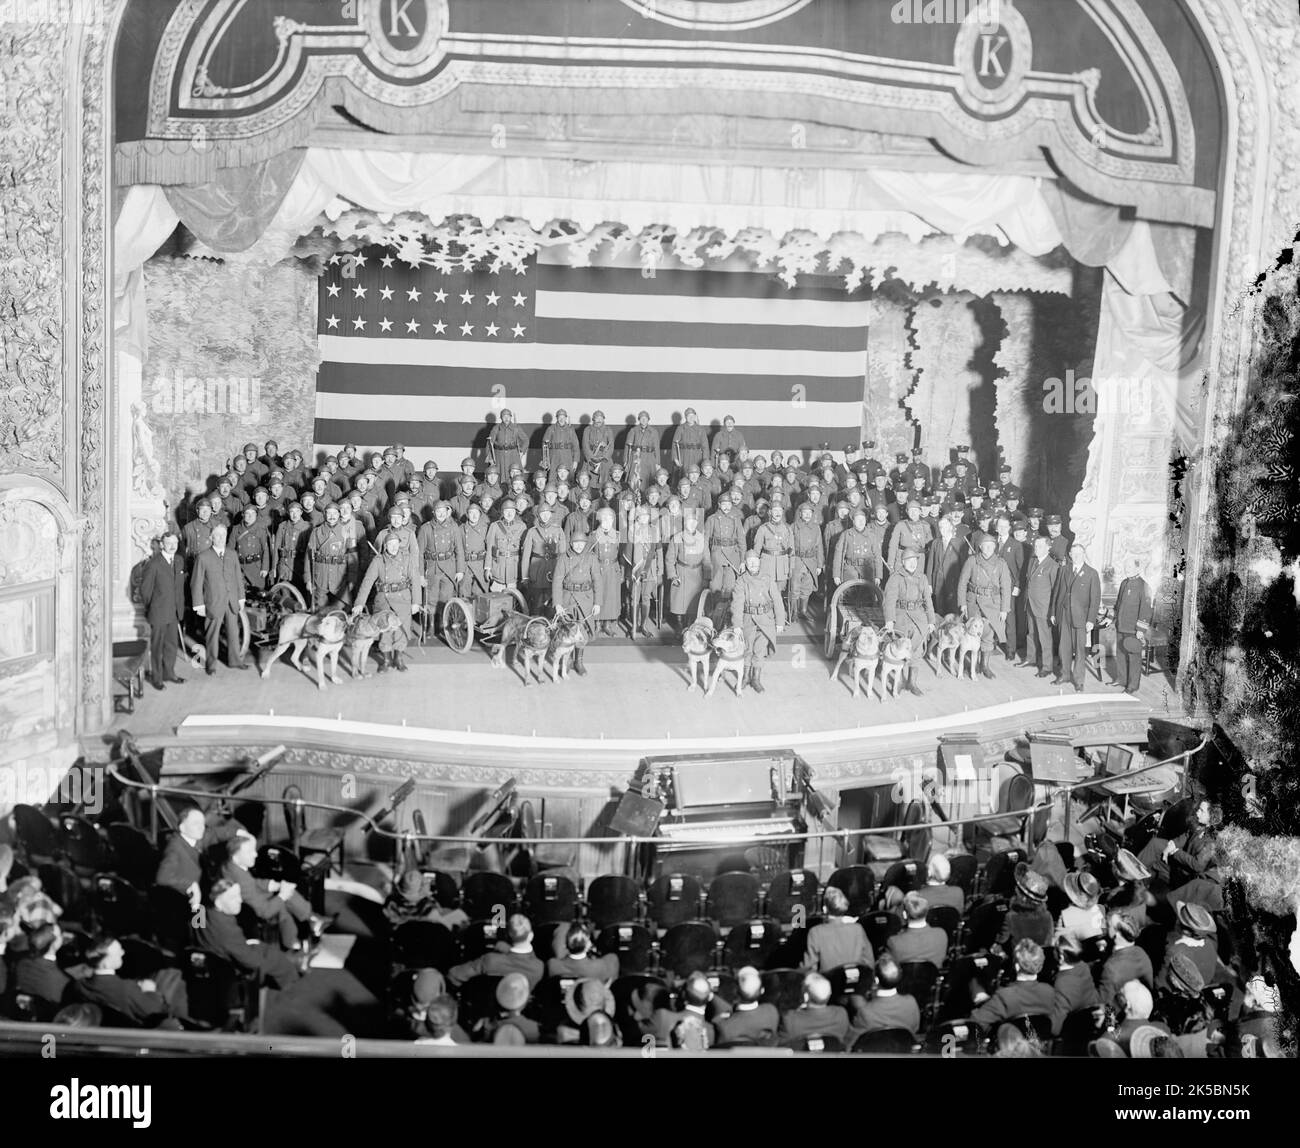 Belgians At Keith Theater, Washington DC, 1919. Soldiers in uniform on stage with dog-carts. Cart on left appears to be carrying a mounted machine gun. Stock Photo